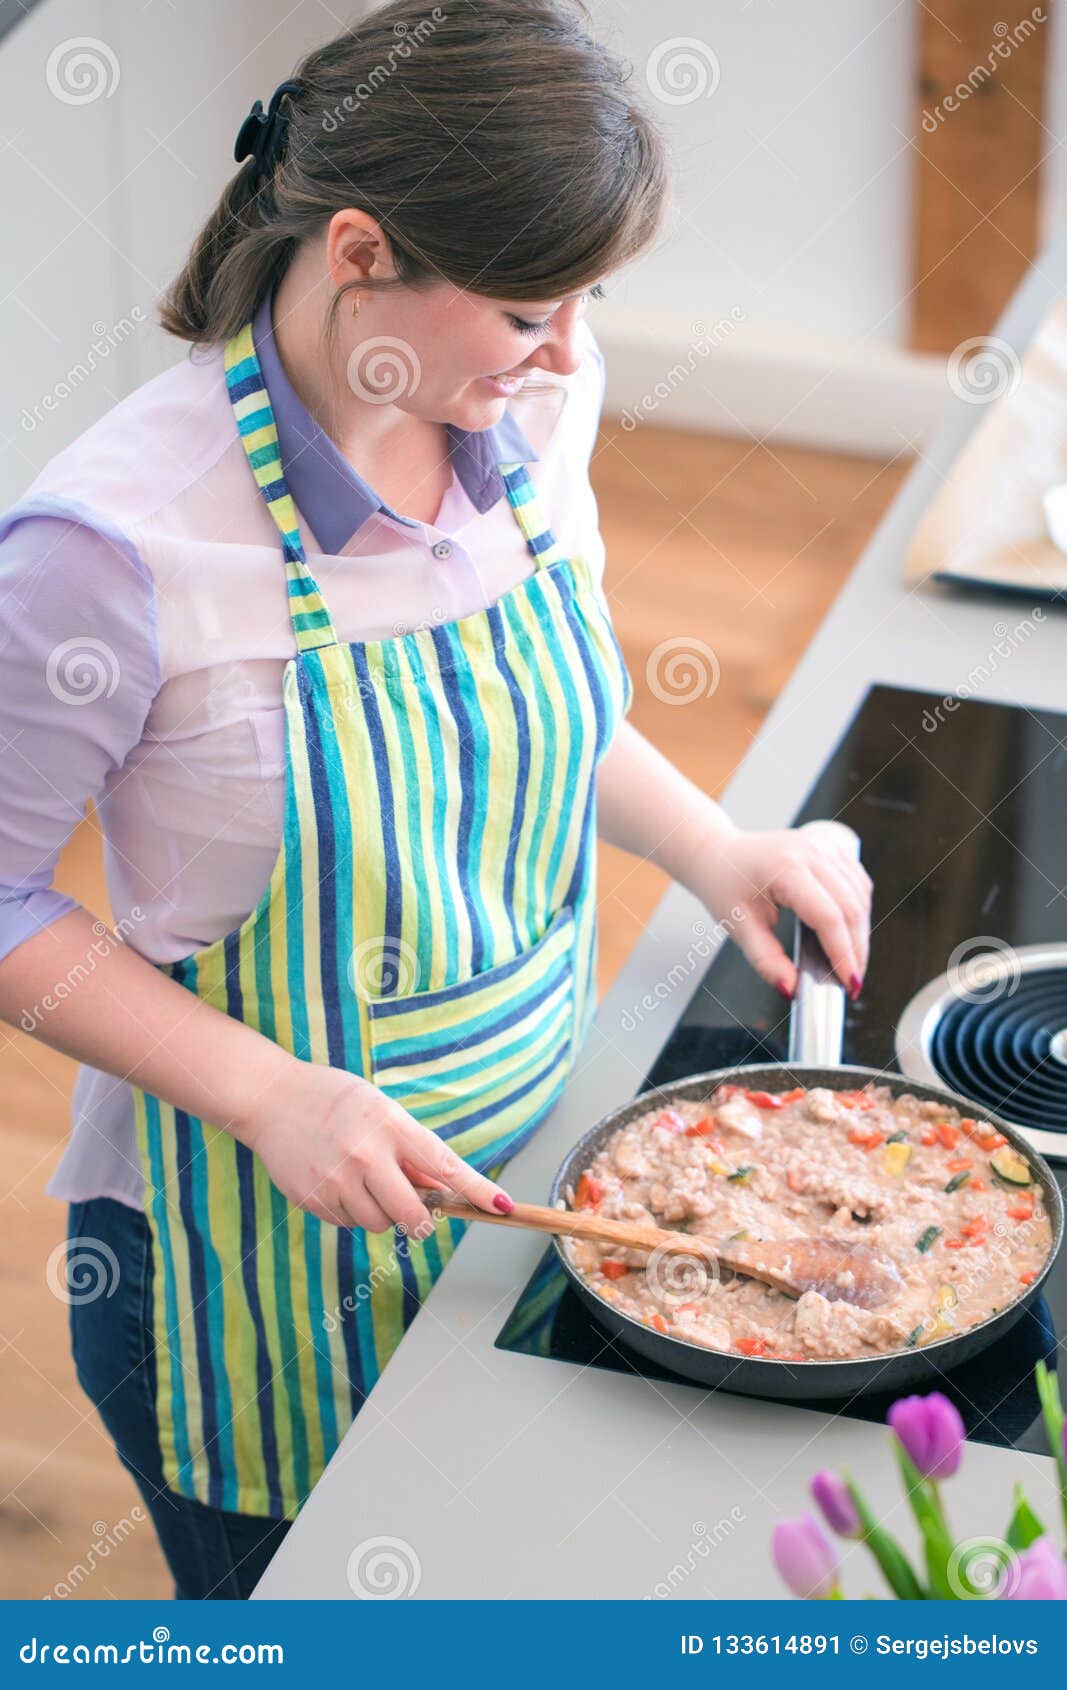 Young Woman Cooking In The Kit